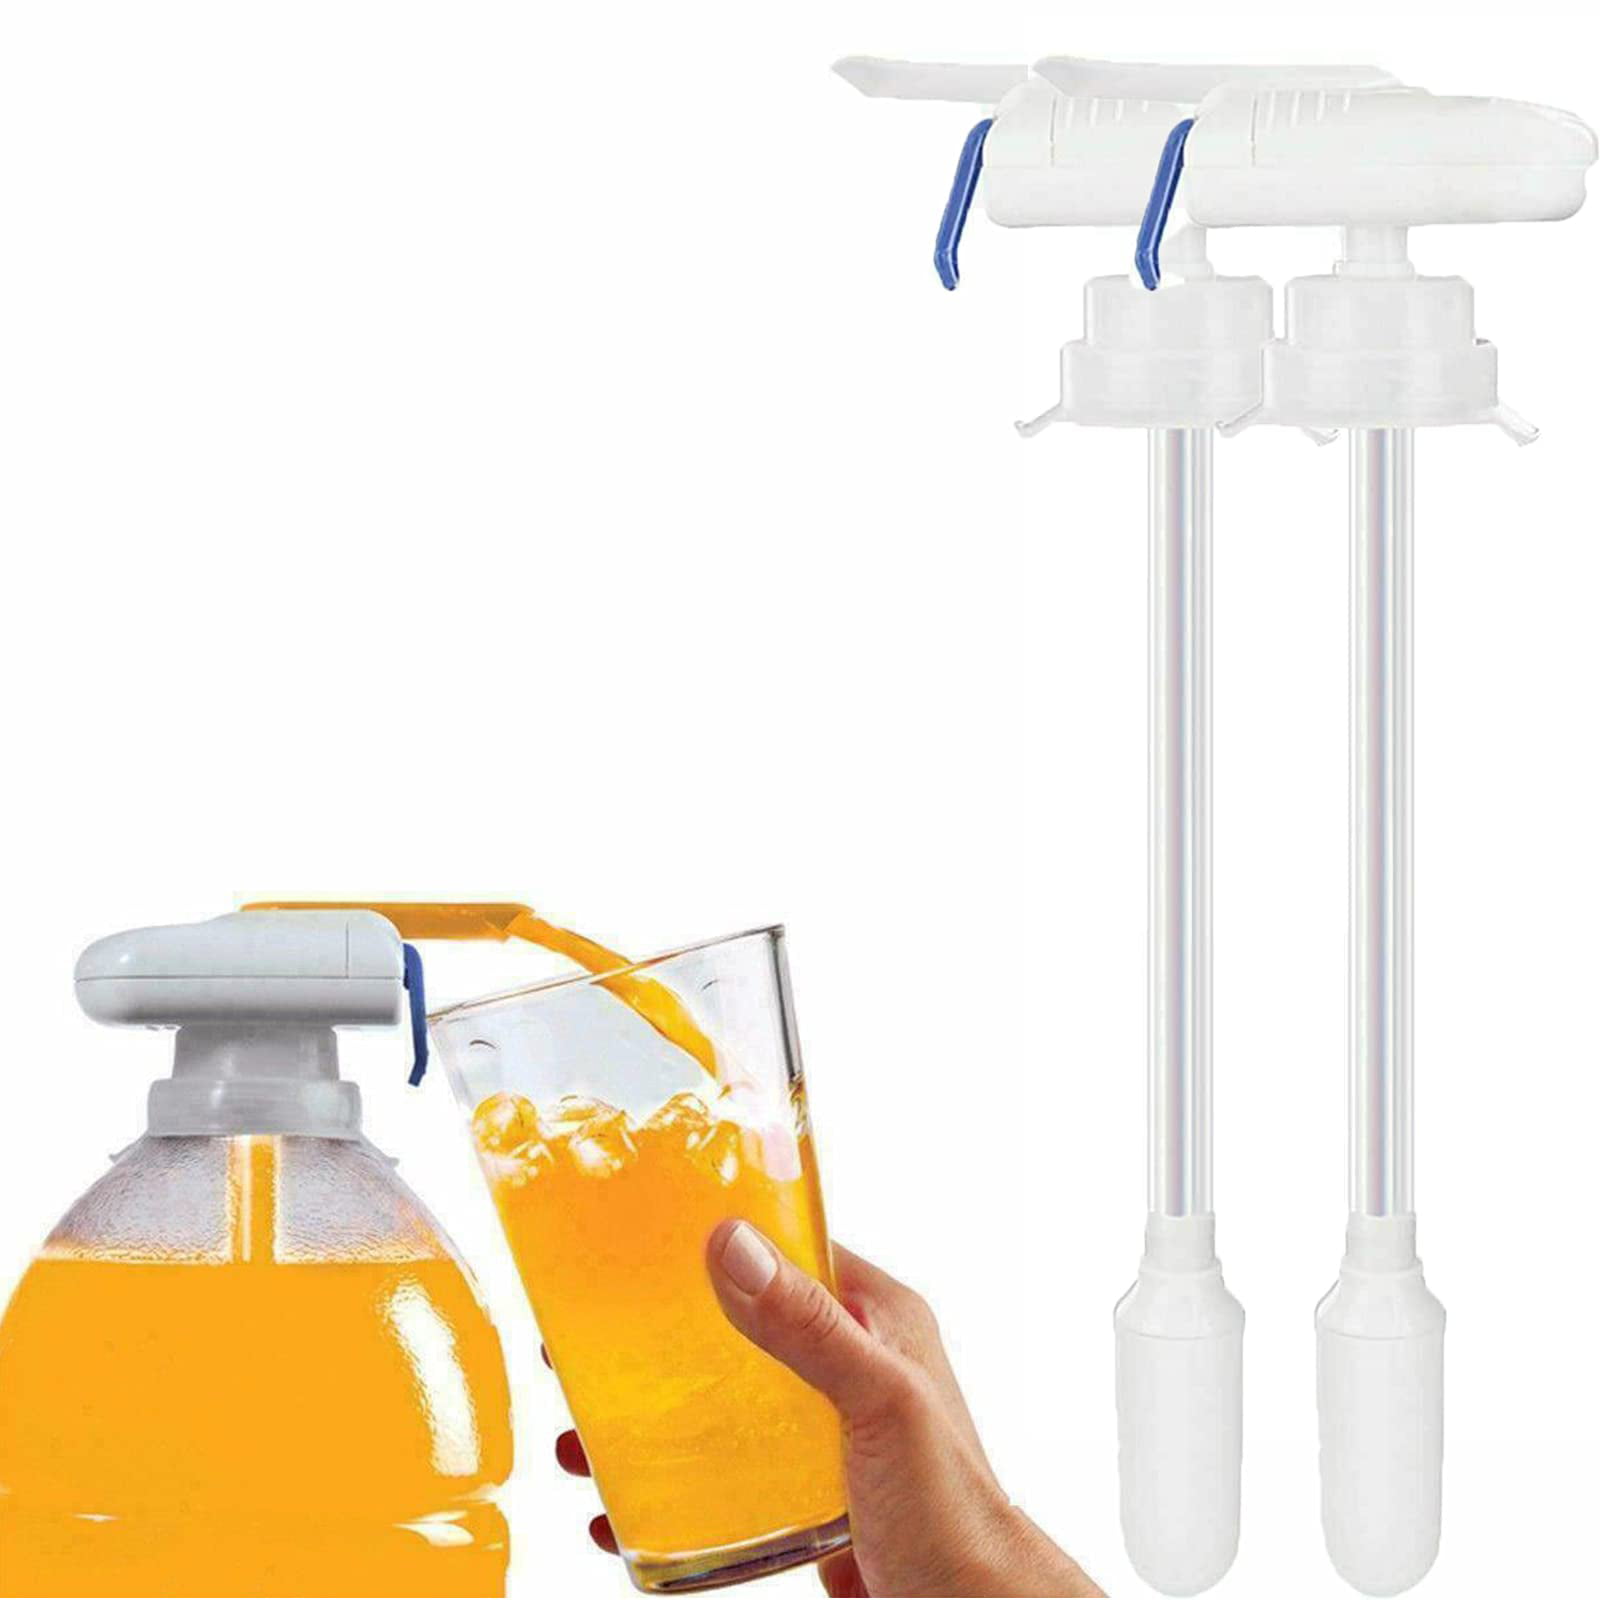 Portable Electric Milk Juice Water Beer Beverage Dispenser for Party Wedding Outdoor Home Kitchen Automatic Drink Dispenser Gadget 2 Pcs Magic Electric Tap